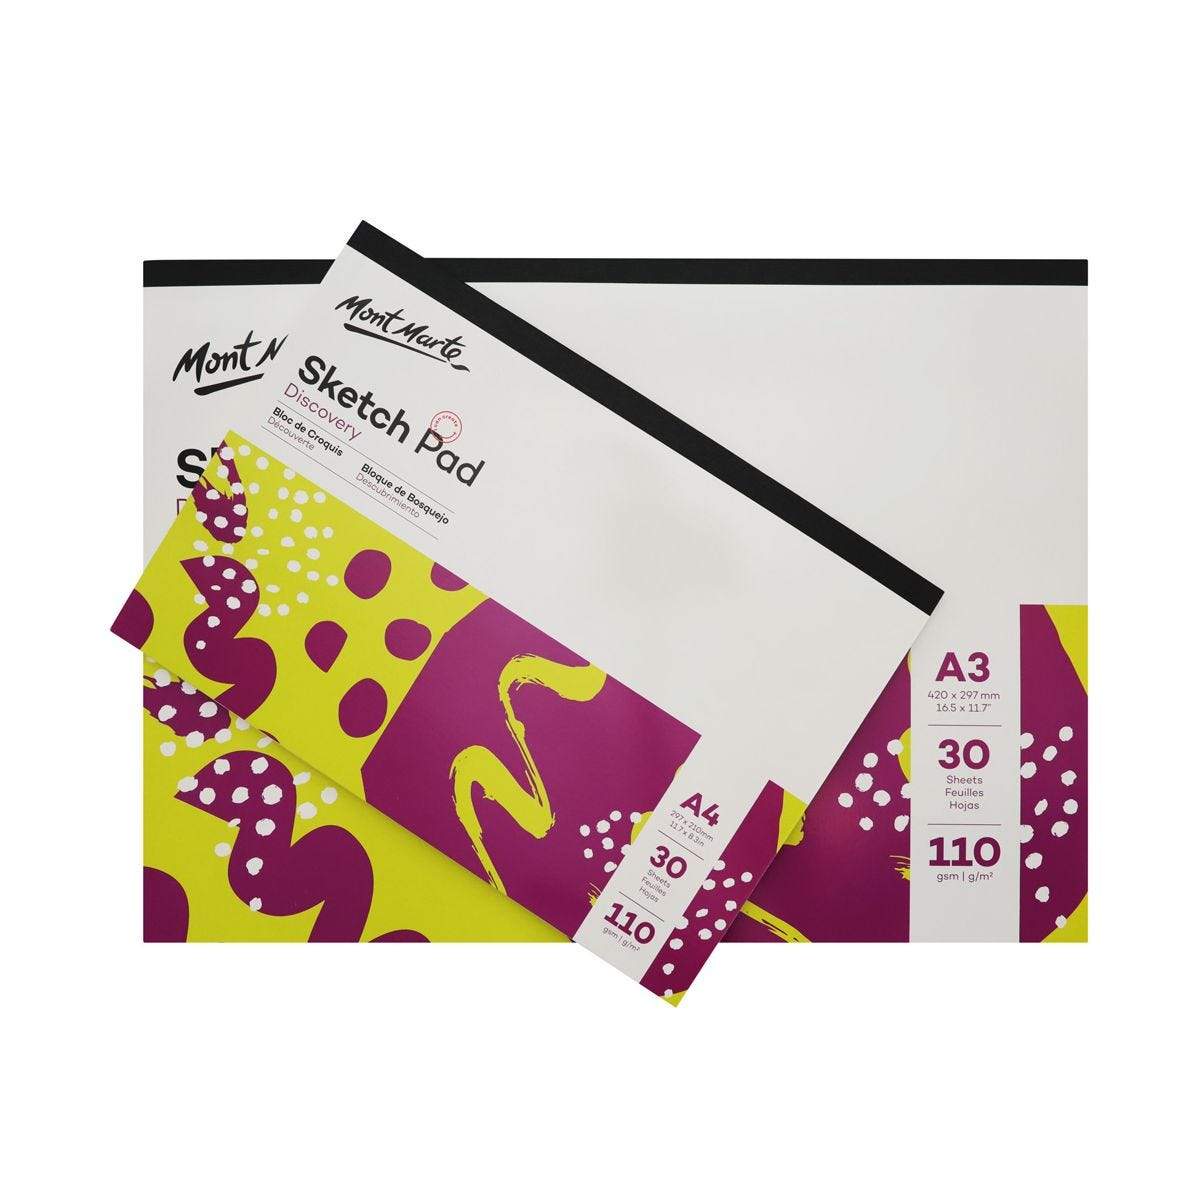 Discovery Sketch Pad 30 sheets 110gsm (2 sizes) - CRAFT2U